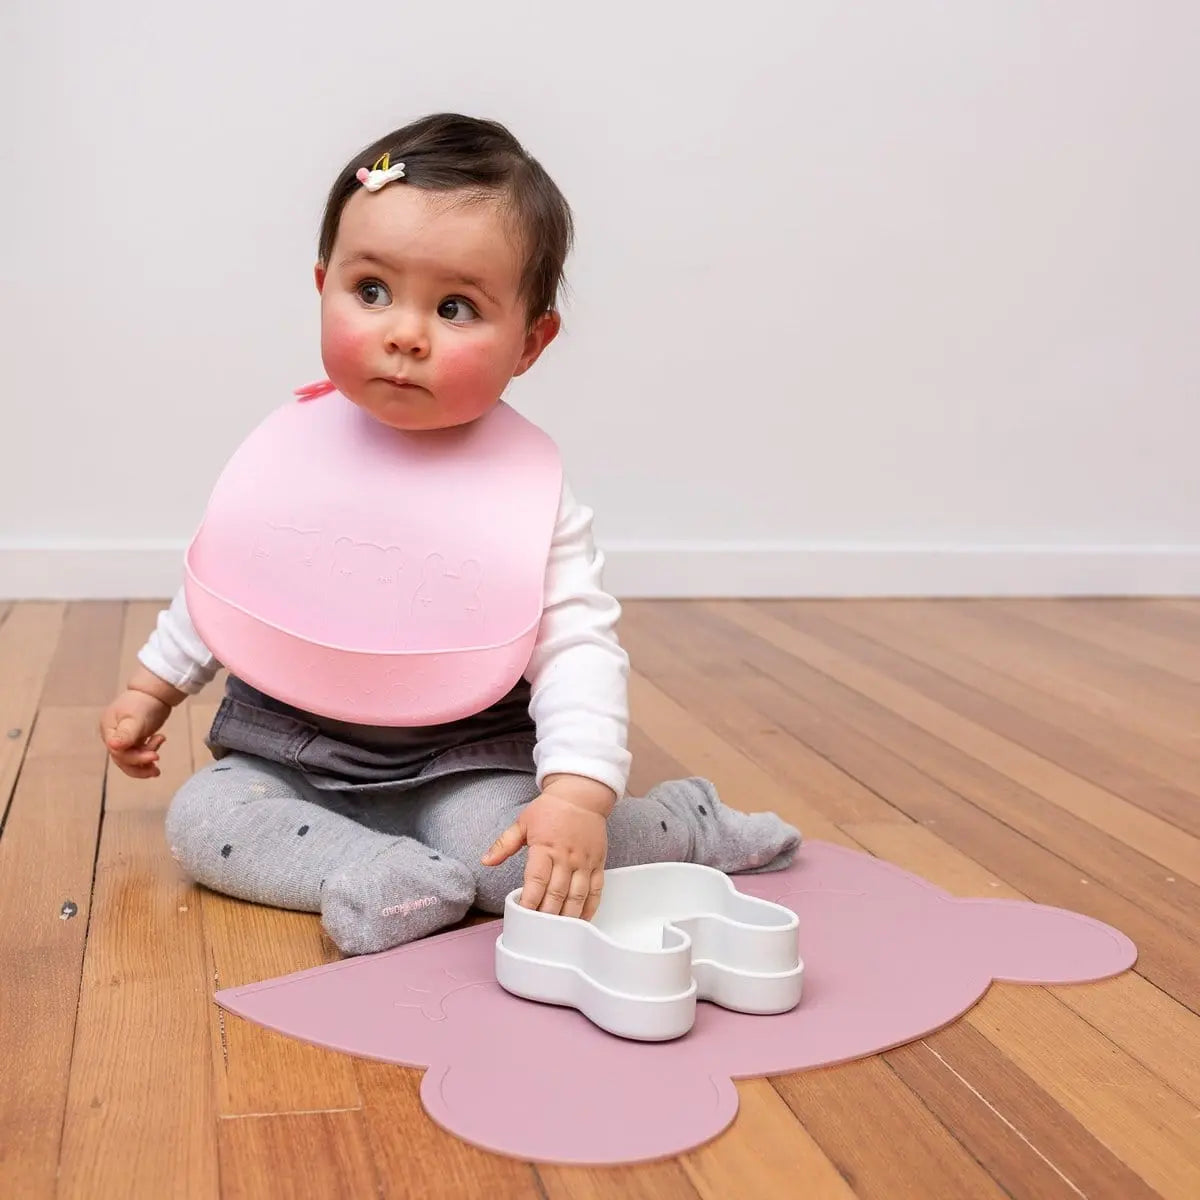 Baby & Toddler Catchie Bibs - Dusty Rose + Powder Pink we might be tiny 27.00